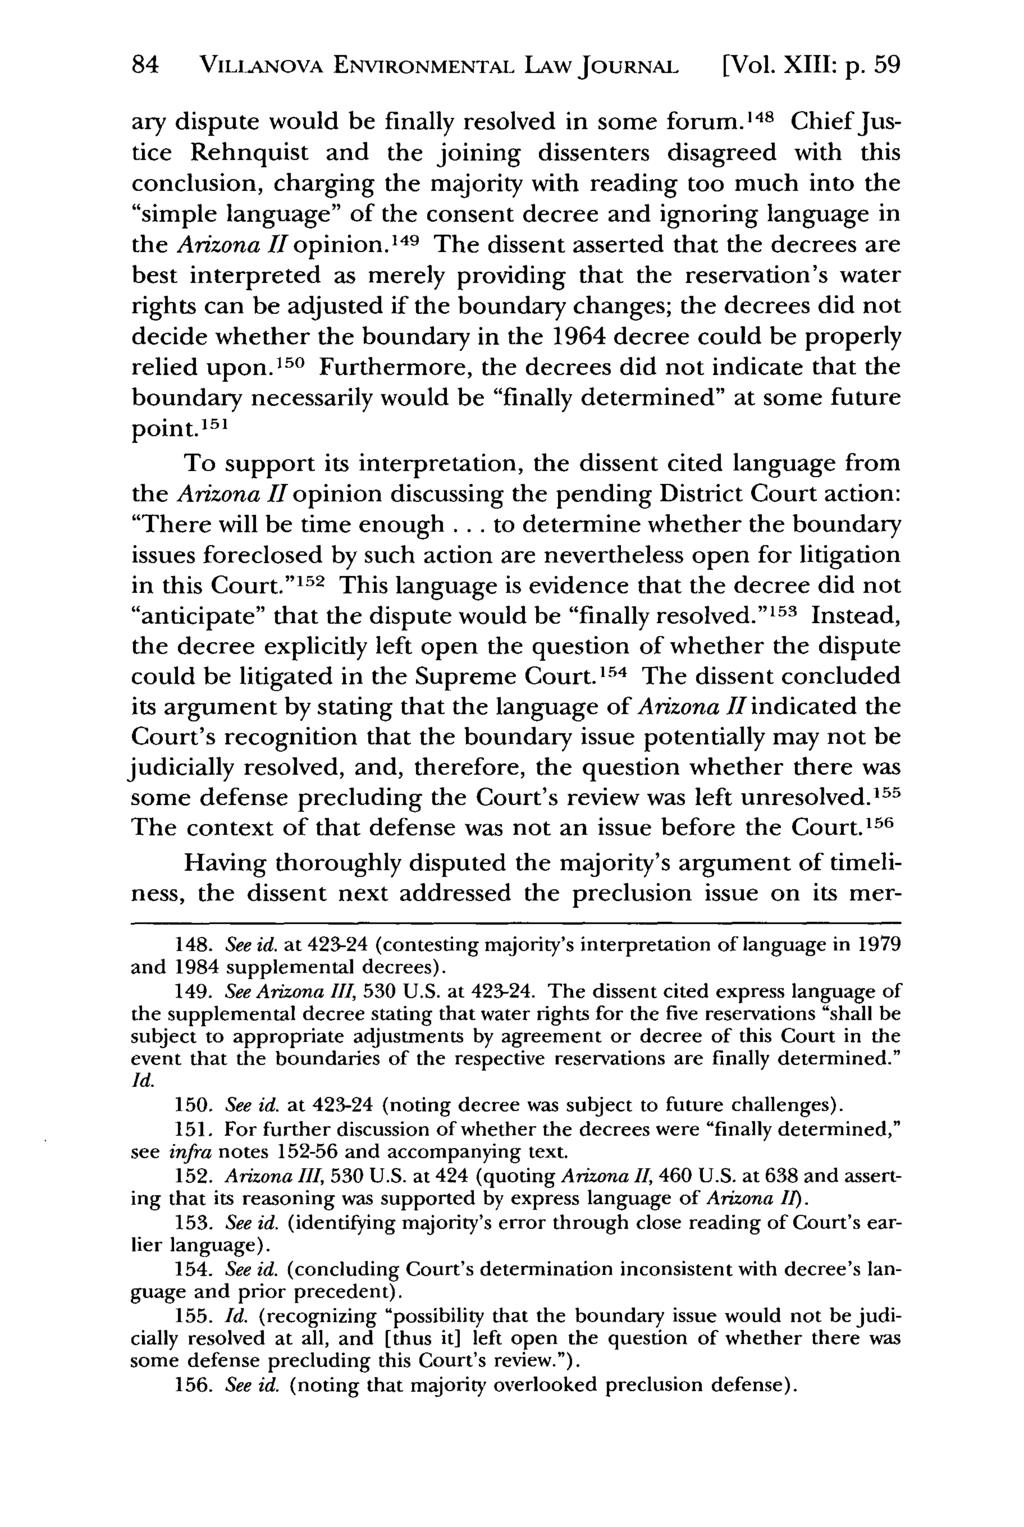 84 VILLANOVA Villanova Environmental ENVIRONMENTAL Law Journal, LAW Vol. JOURNAL 13, Iss. 1 [2002], Art. [Vol. 2 XIII: p. 59 ary dispute would be finally resolved in some forum.